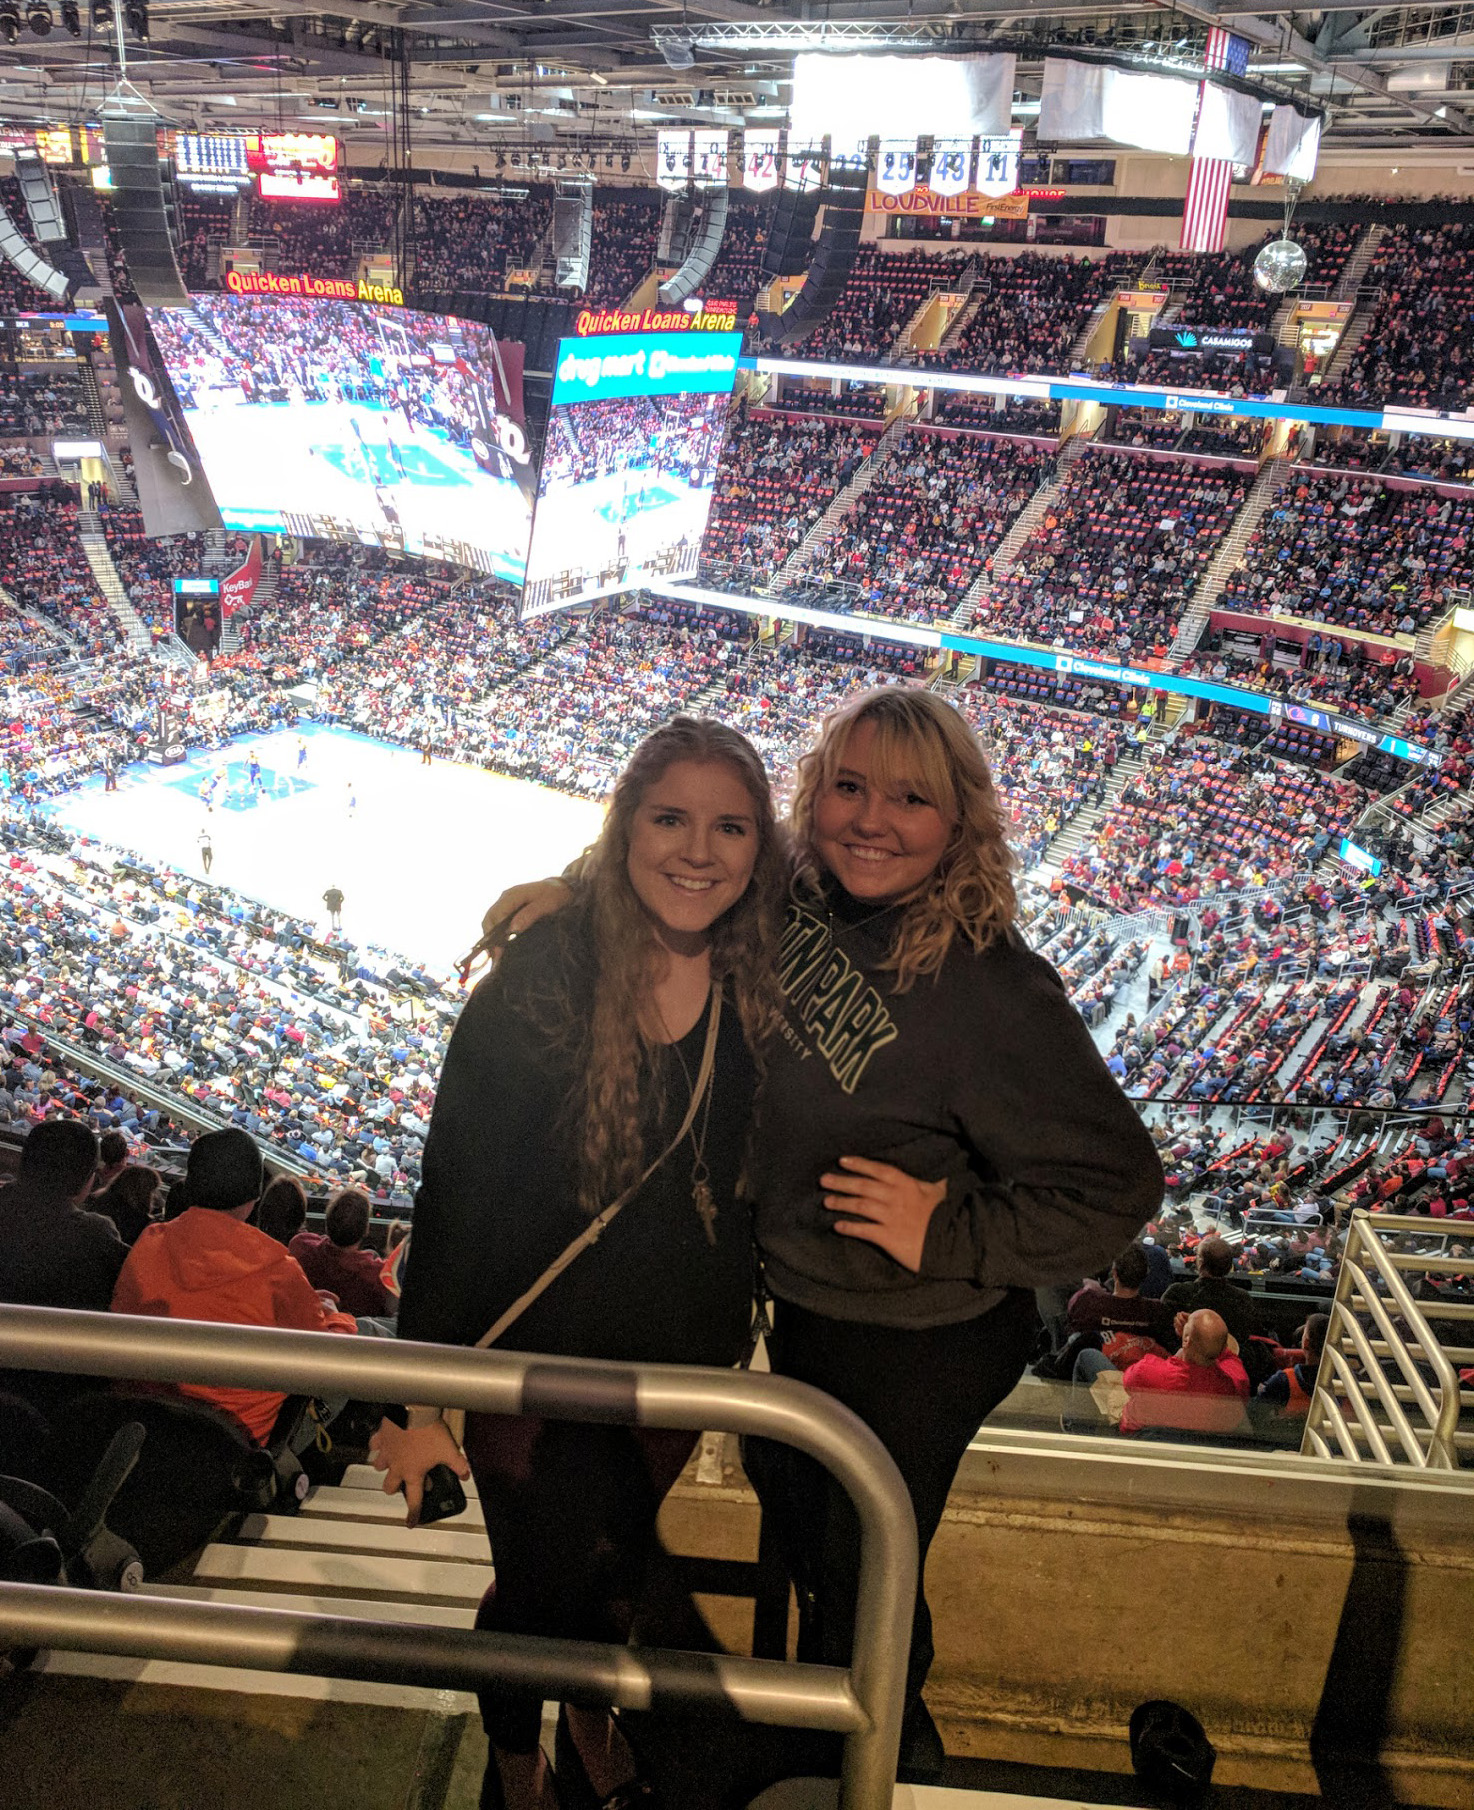 SAEM Club members Maddie Winger and Bryana Appley at the Quicken Loans Arena for a Cleveland Cavaliers game